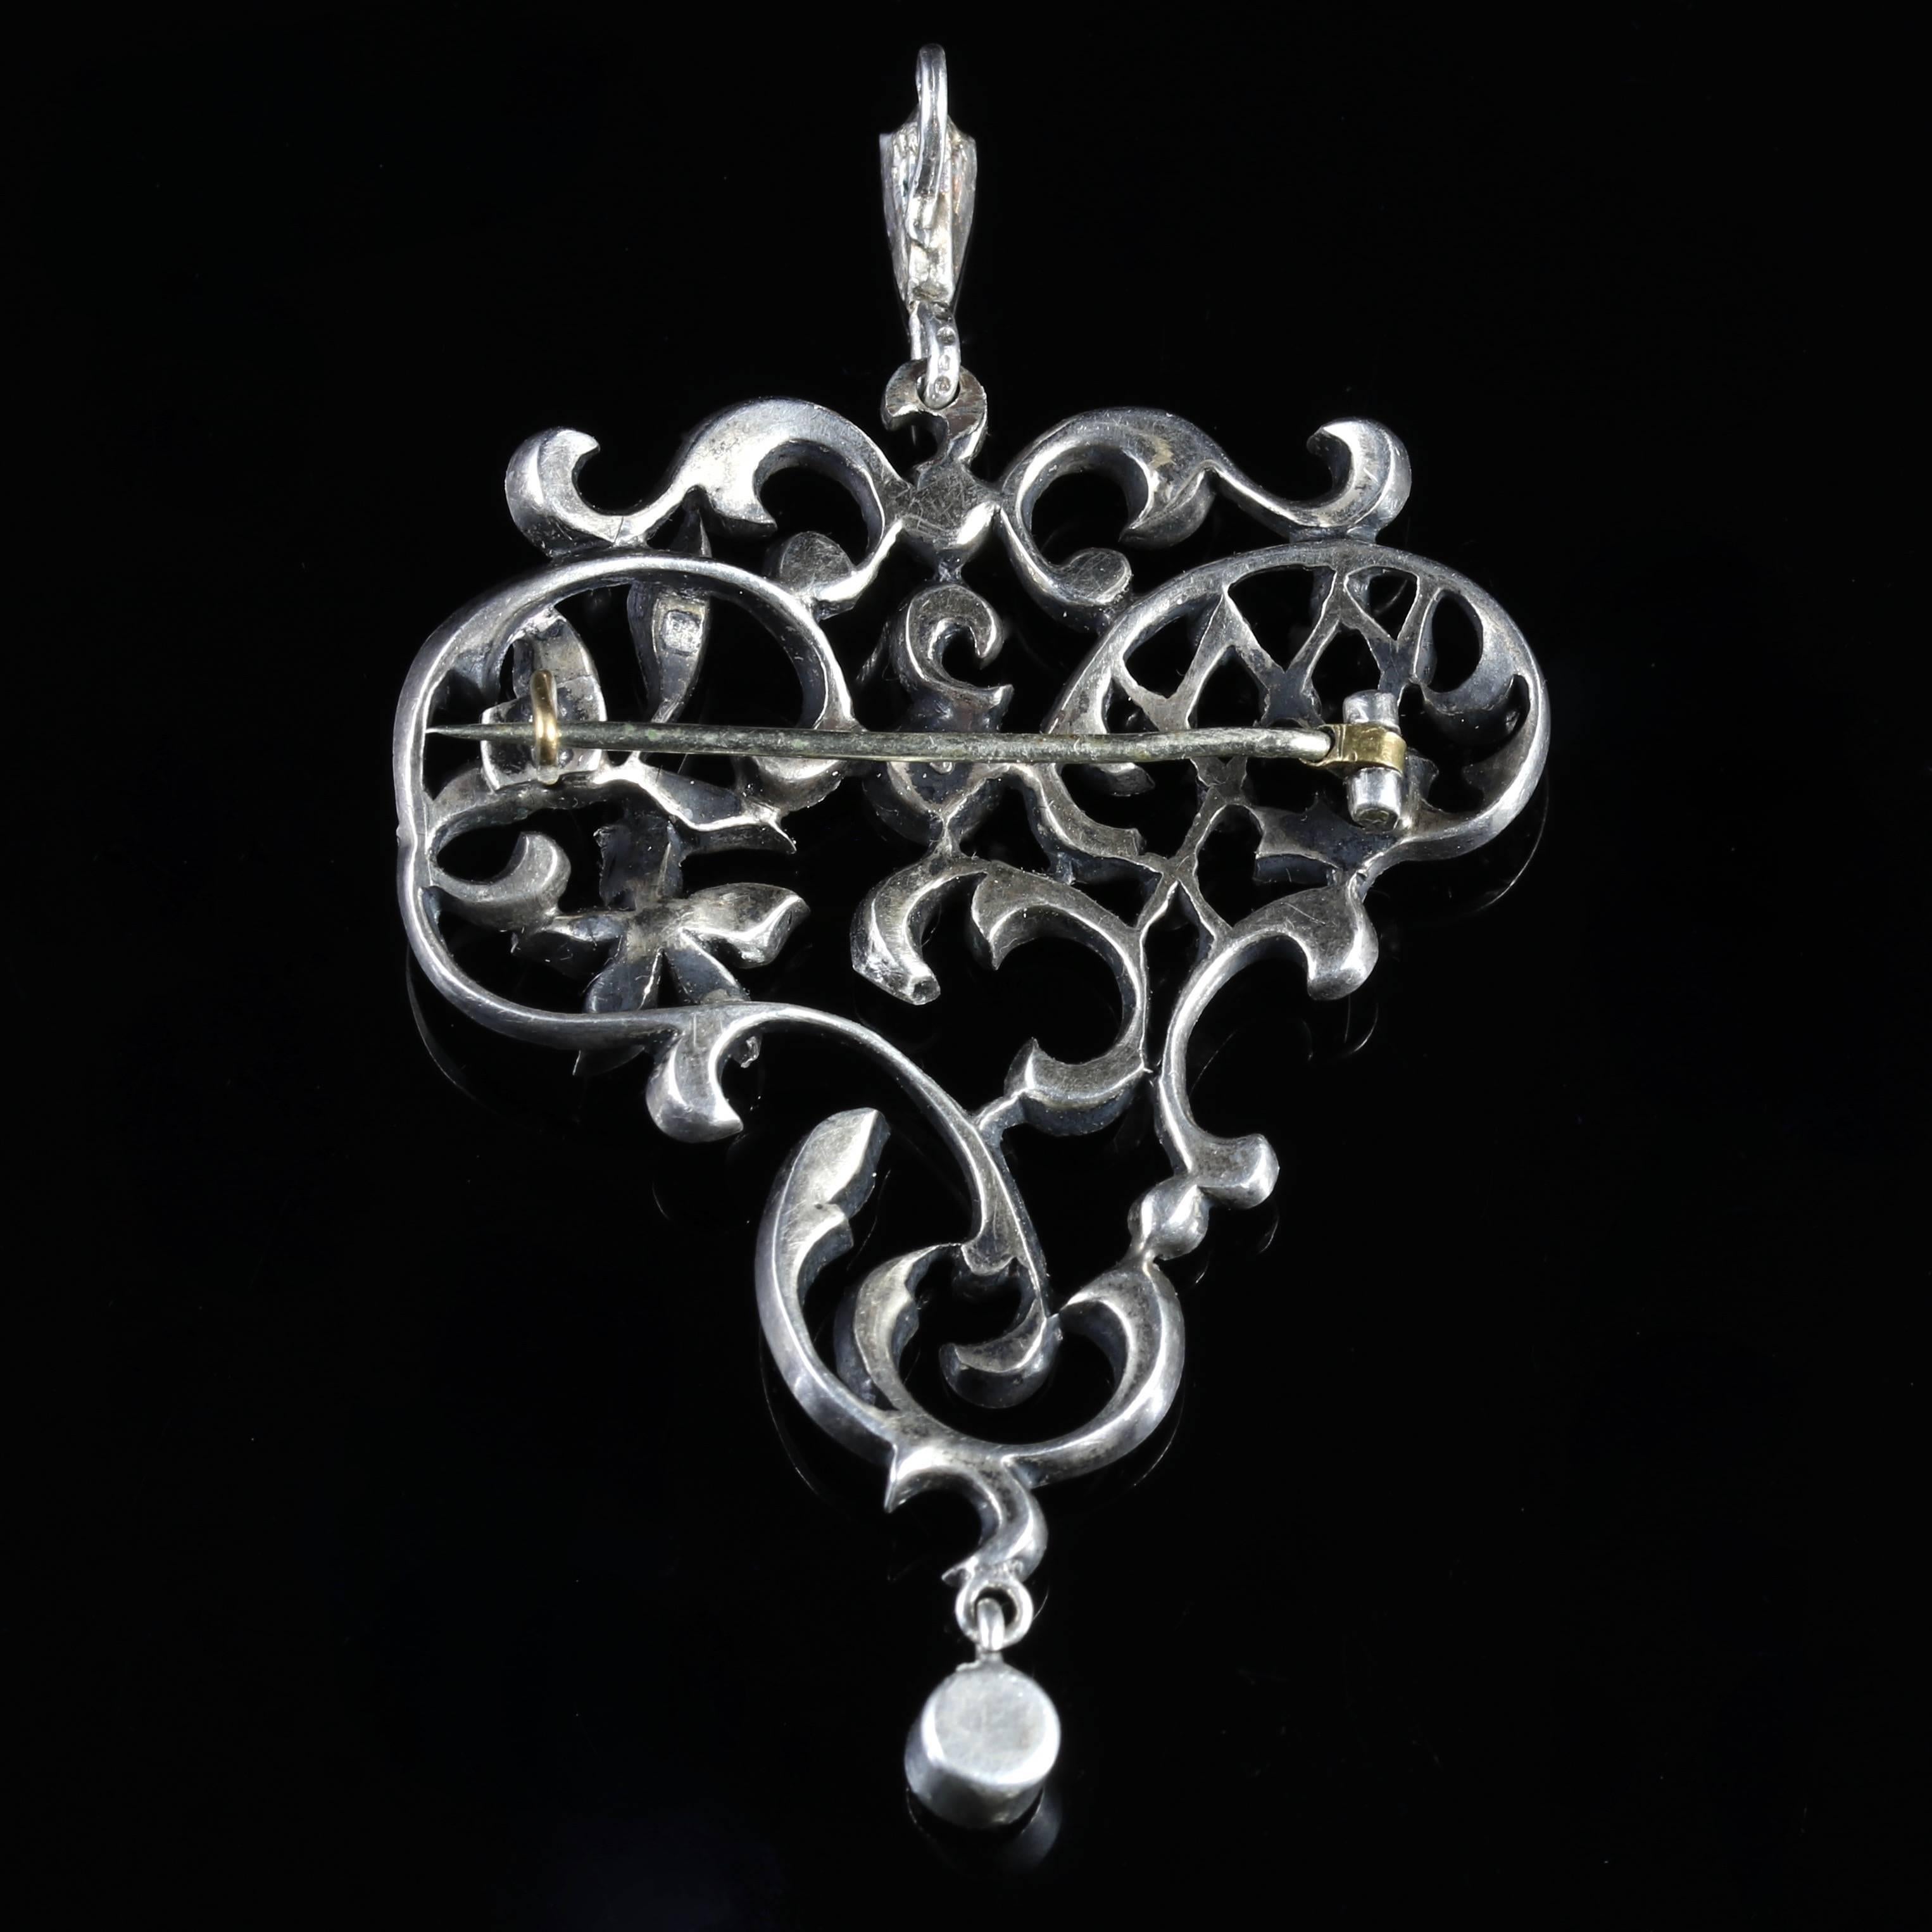 This fabulous Victorian Sterling Silver pendant brooch is adorned with old cut Paste Stones, all original, with the pin and C catch - Circa 1880.

The bale is set with Paste Stones, leading to beautiful, floral workmanship.

Paste is a heavy, very